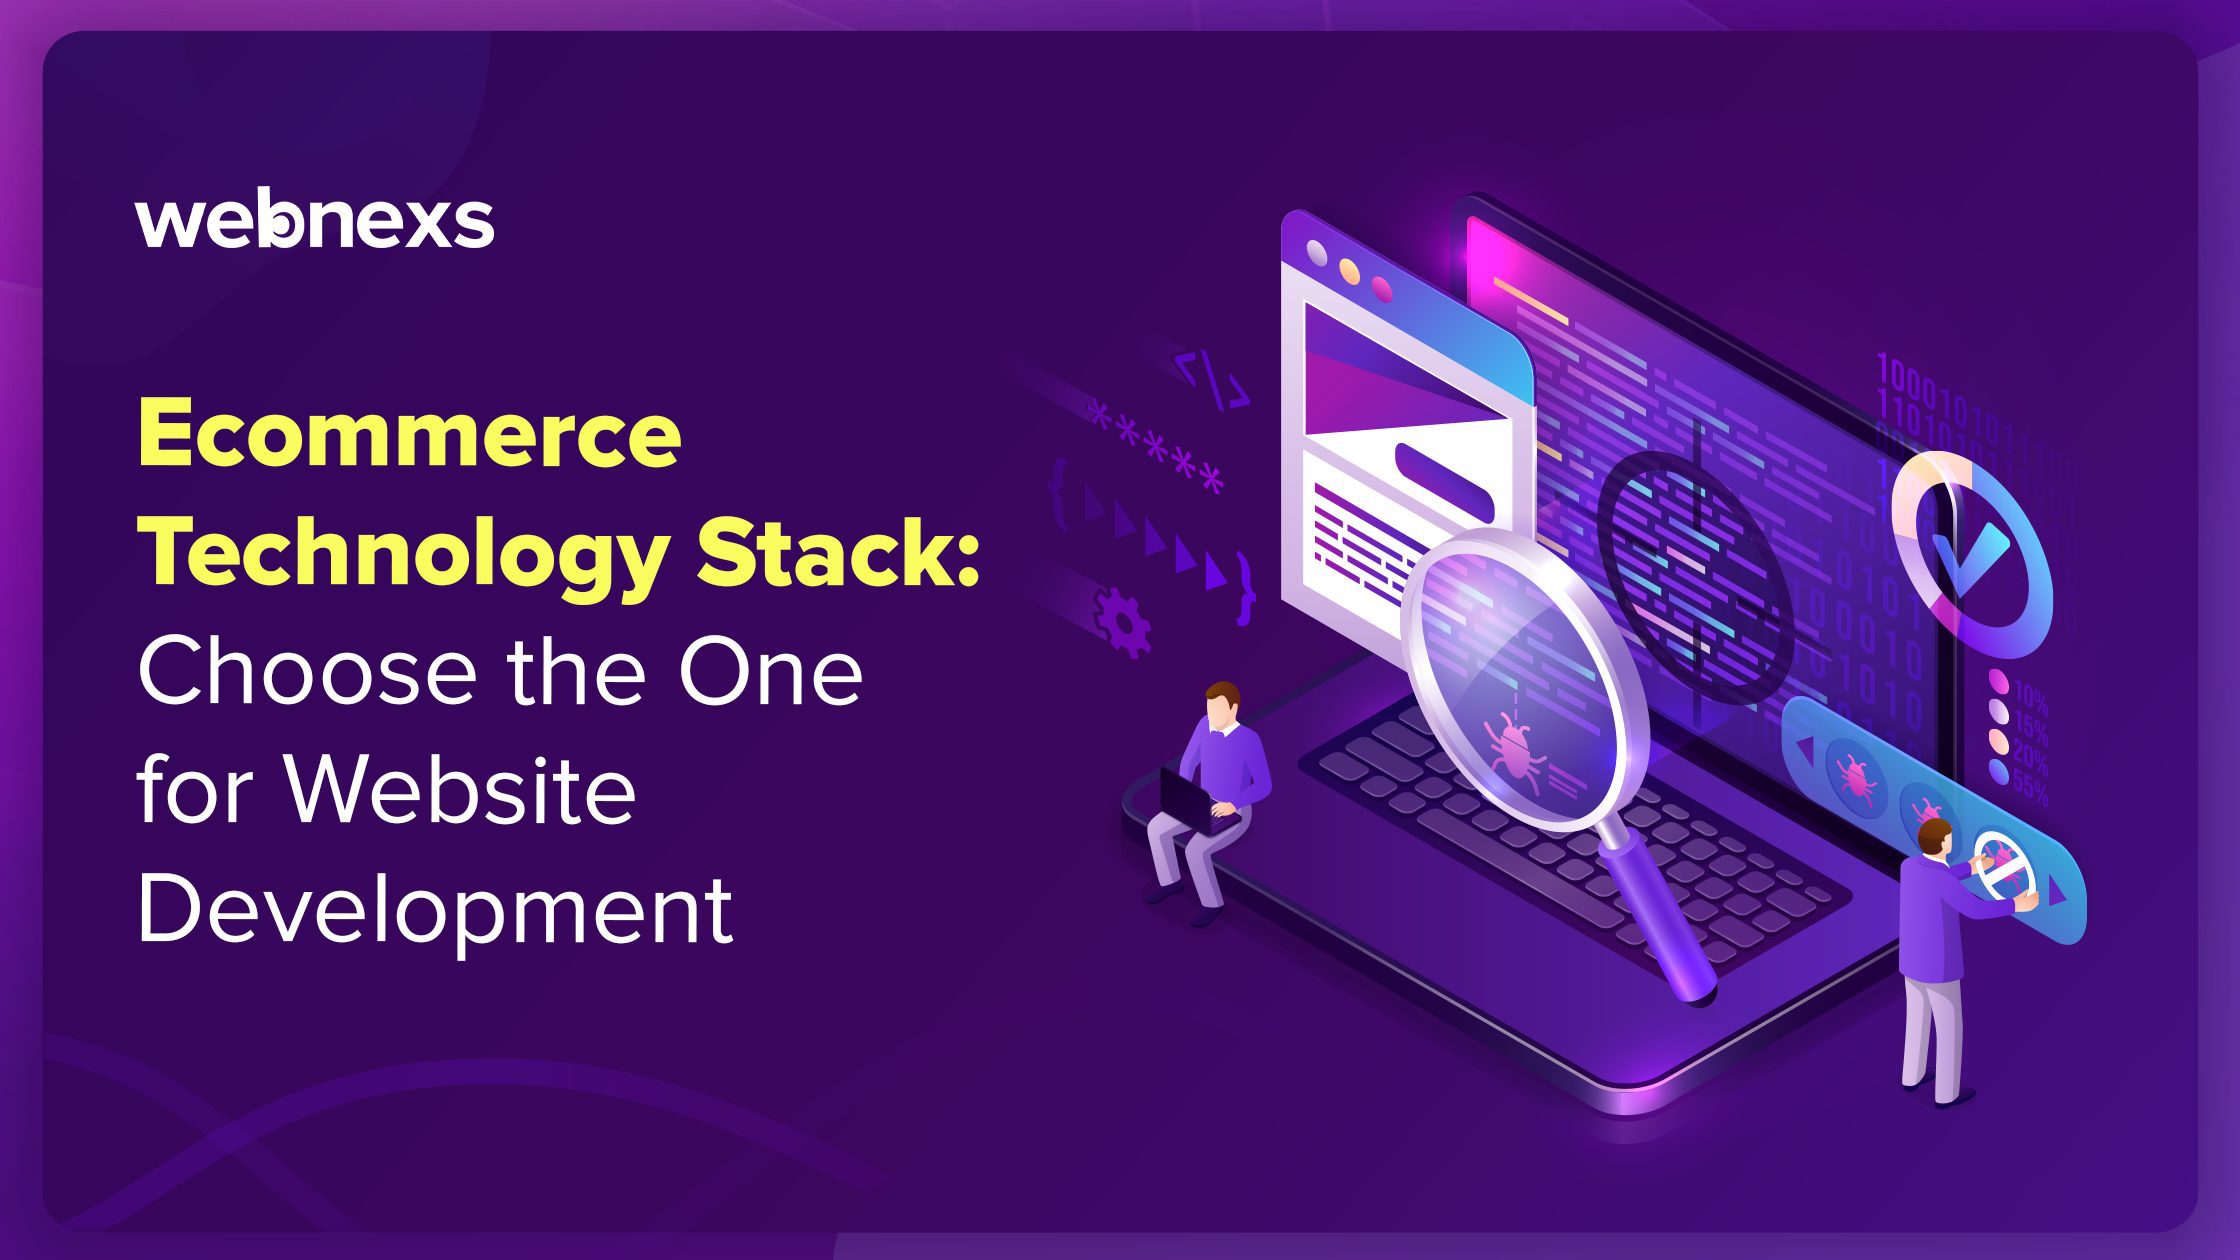 Ecommerce Technology Stack: Choose One For Website Development